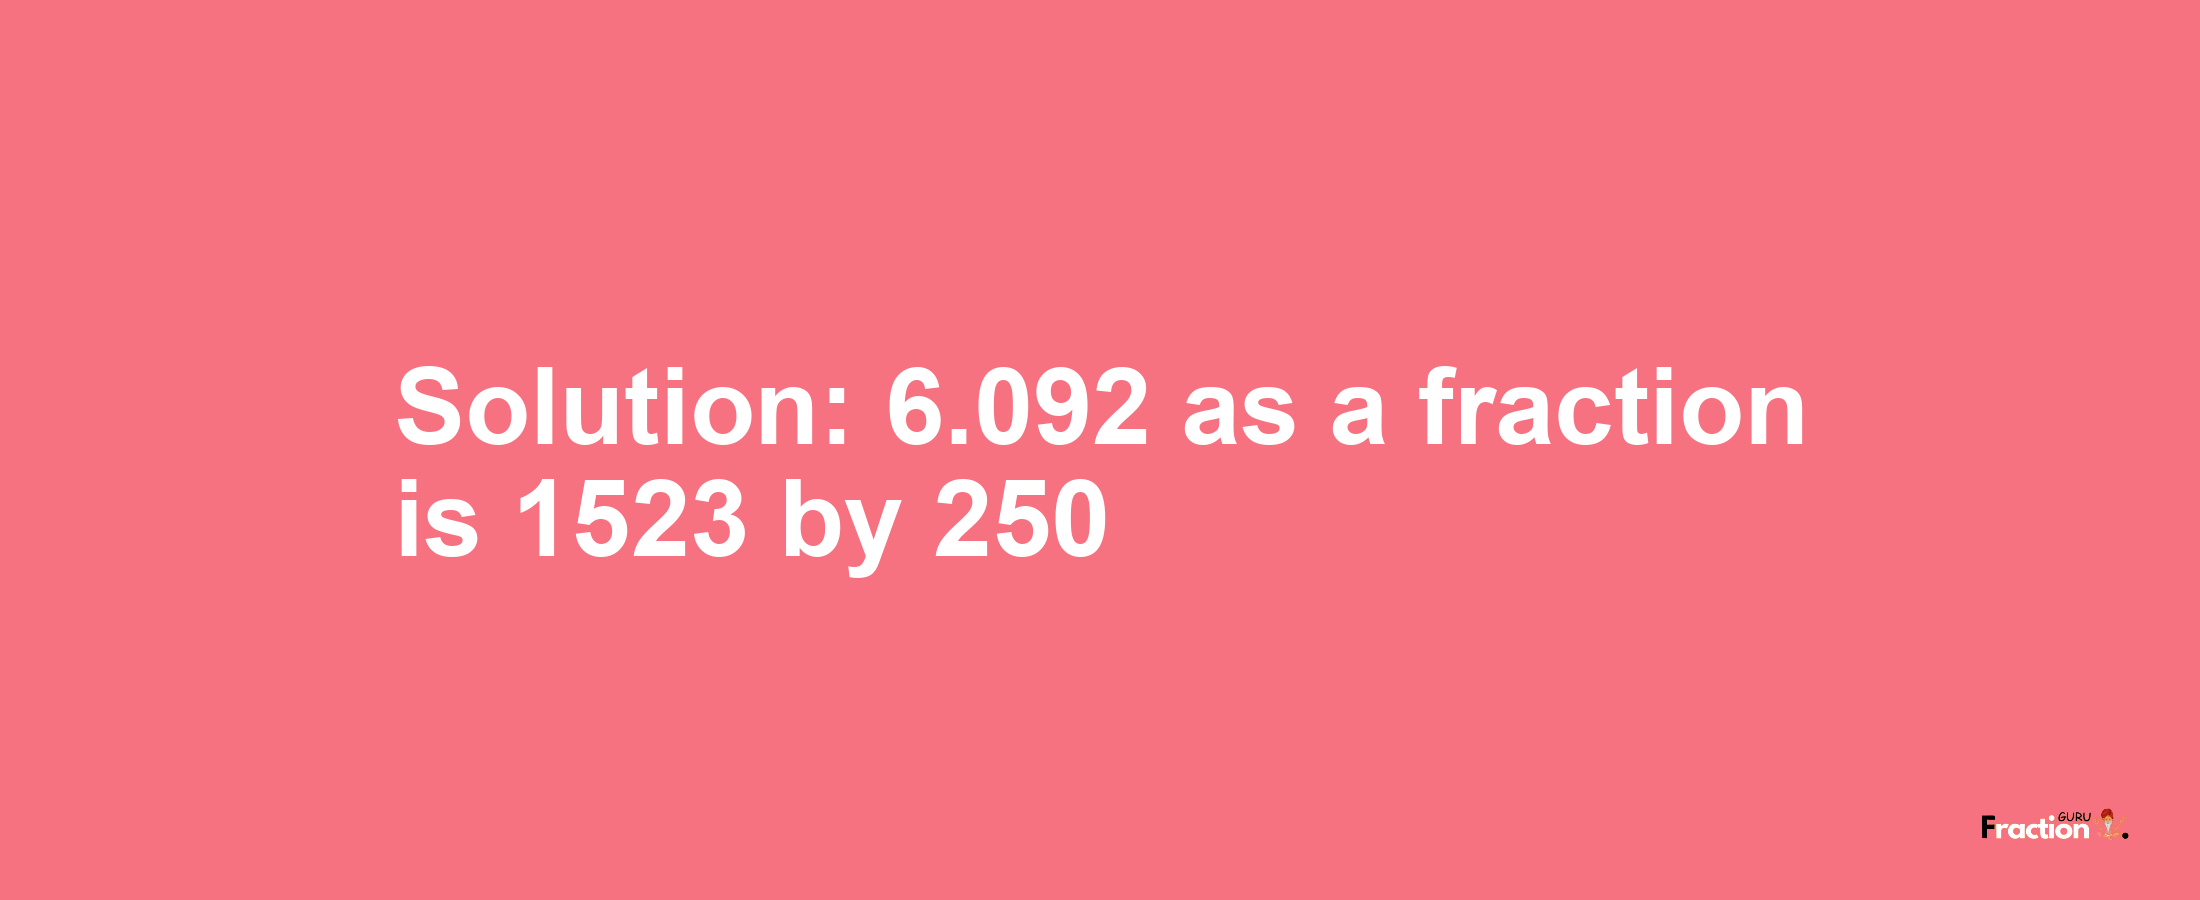 Solution:6.092 as a fraction is 1523/250